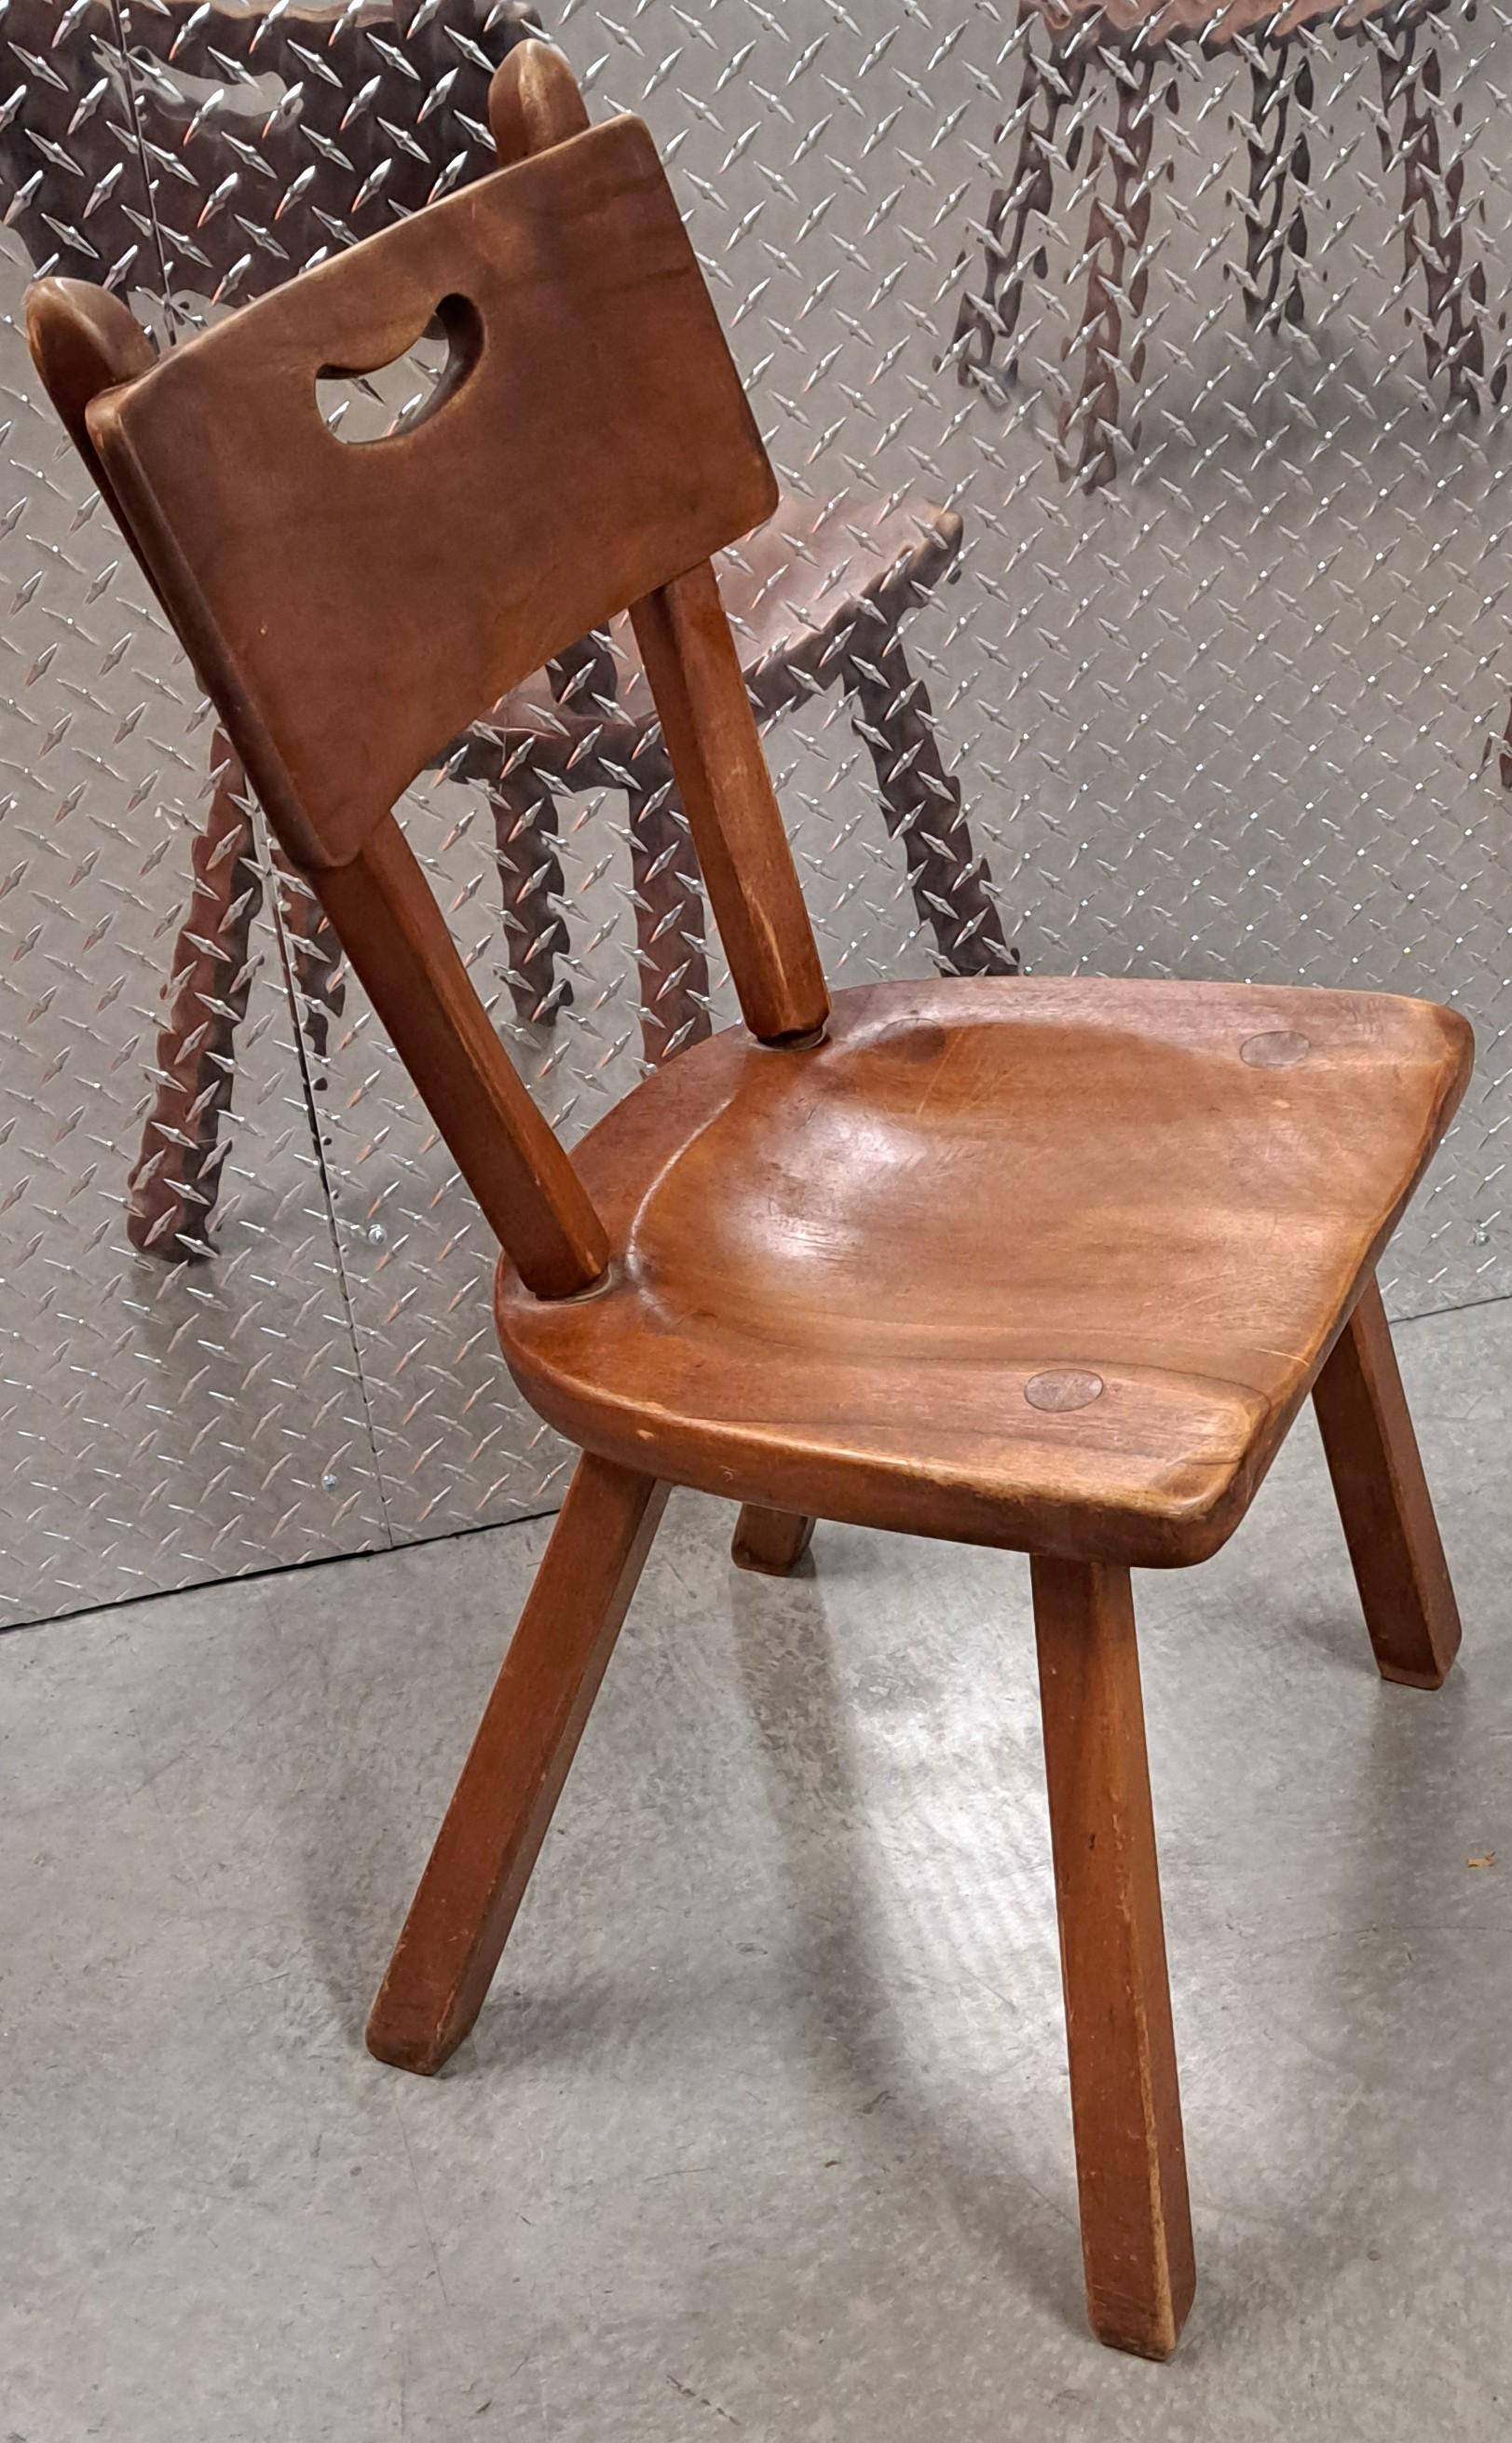 Set of four Herman DeVries for Cushman Furniture colonial style carved wood chairs. With the Cushman bronze label and authentication stamped under the seat. Very sturdy chairs will last many generations.